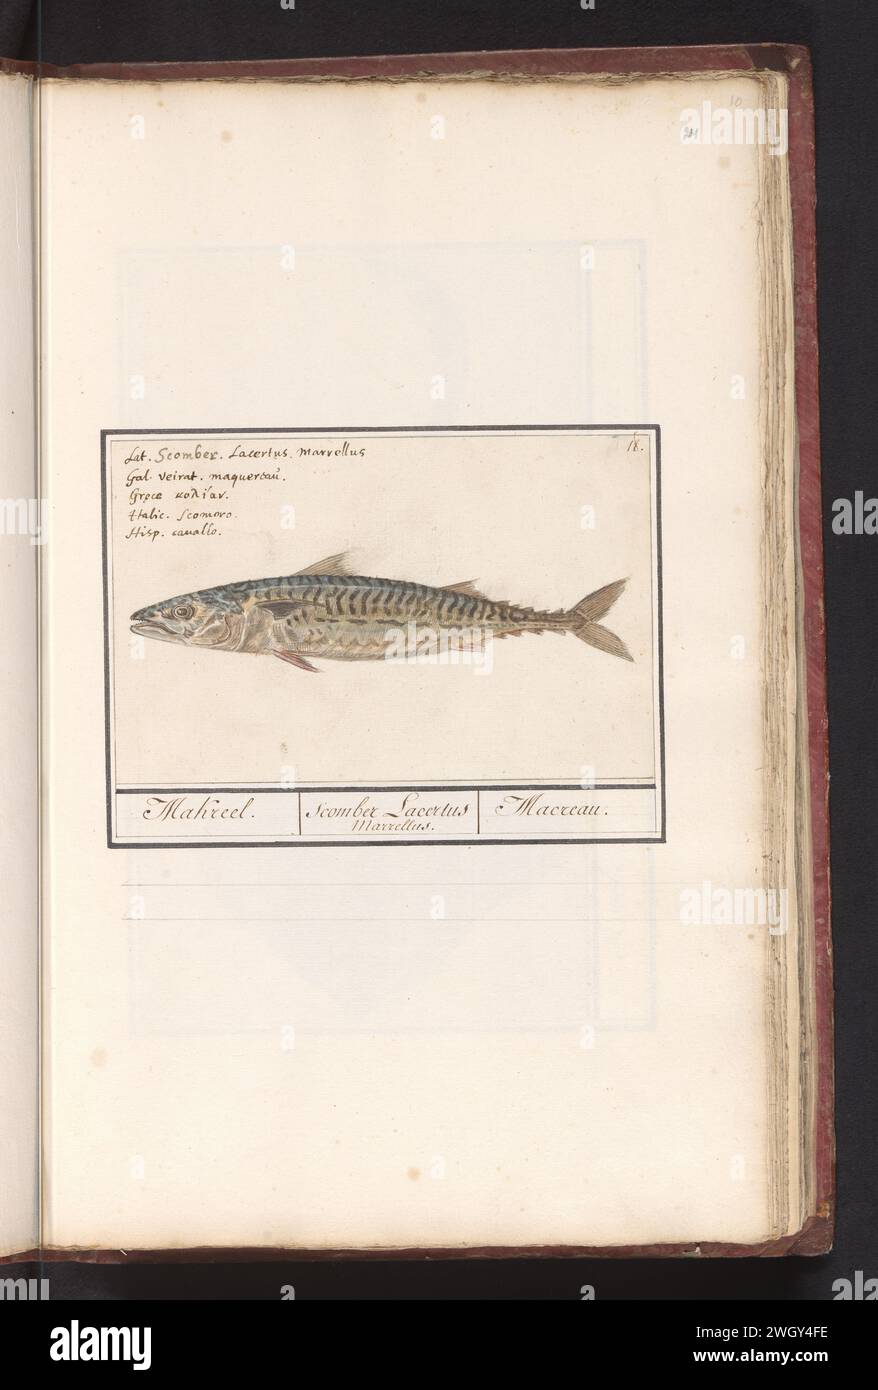 Makrol (Scomber Scomus), Anselmus Boetius De Boodt, 1596 - 1610 drawing Mackerel. Numbered at the top right: 18. At the top left the name in five languages. Part of the sixth album with drawings of fish, shells and insects. Sixth of twelve albums with drawings of animals, birds and plants known around 1600, made commissioned by Emperor Rudolf II. With explanation in Dutch, Latin and French. draughtsman: Praagdraughtsman: Delft paper. pencil. chalk. watercolor (paint). ink brush / pen bony fishes: mackerel Stock Photo